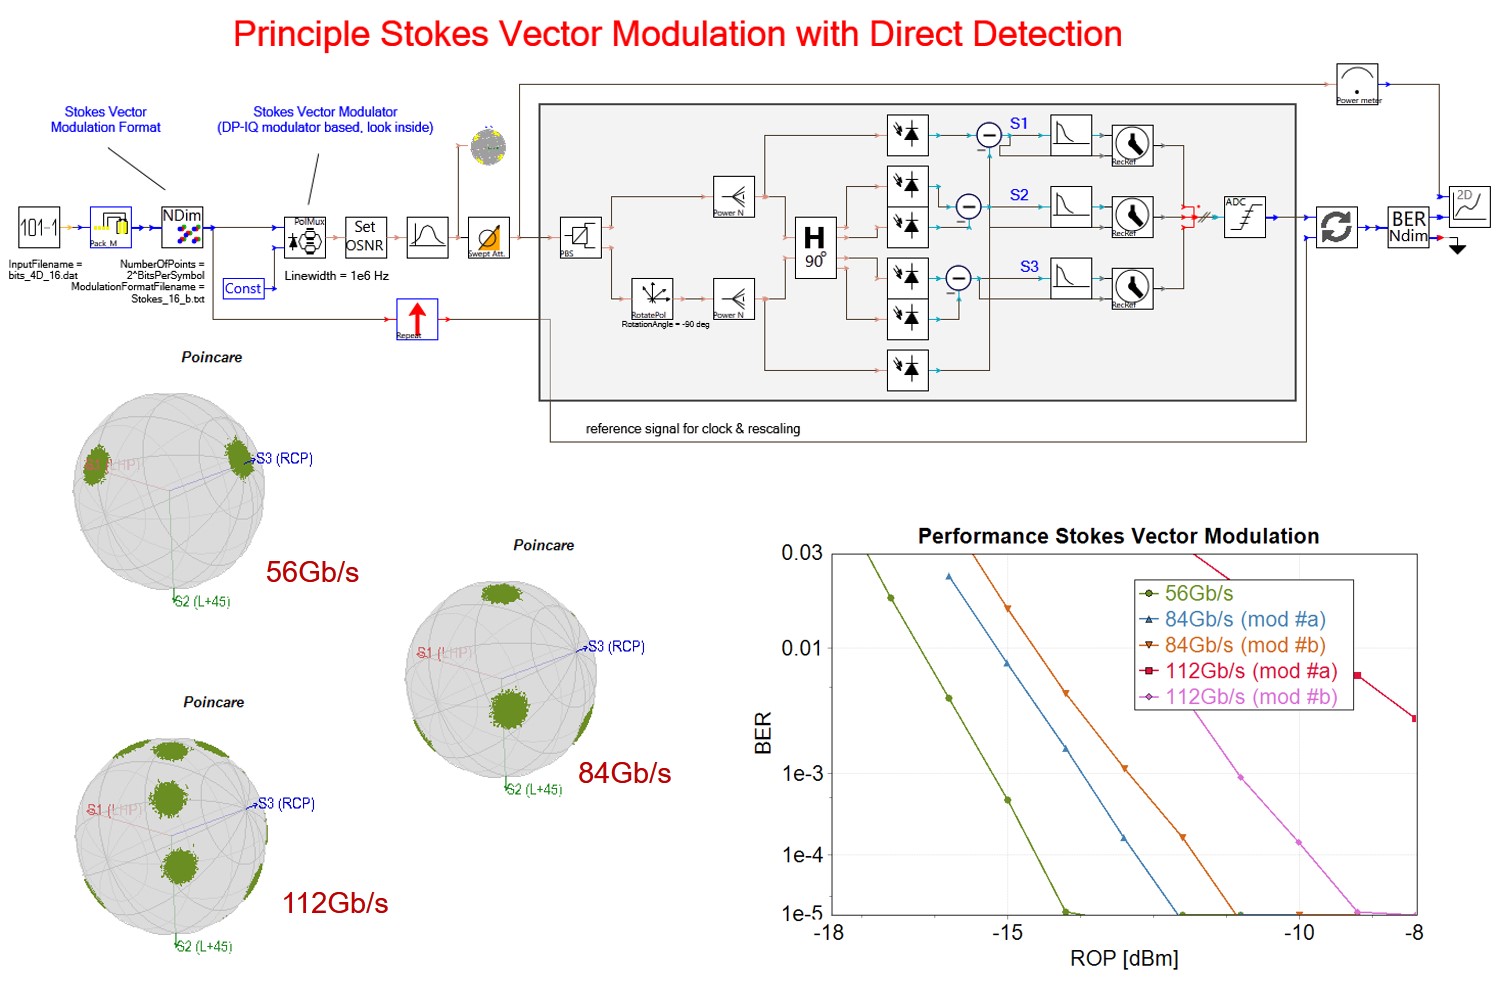 Simulation setup & results for Principle Stokes Vector Modulation with Direct Detection